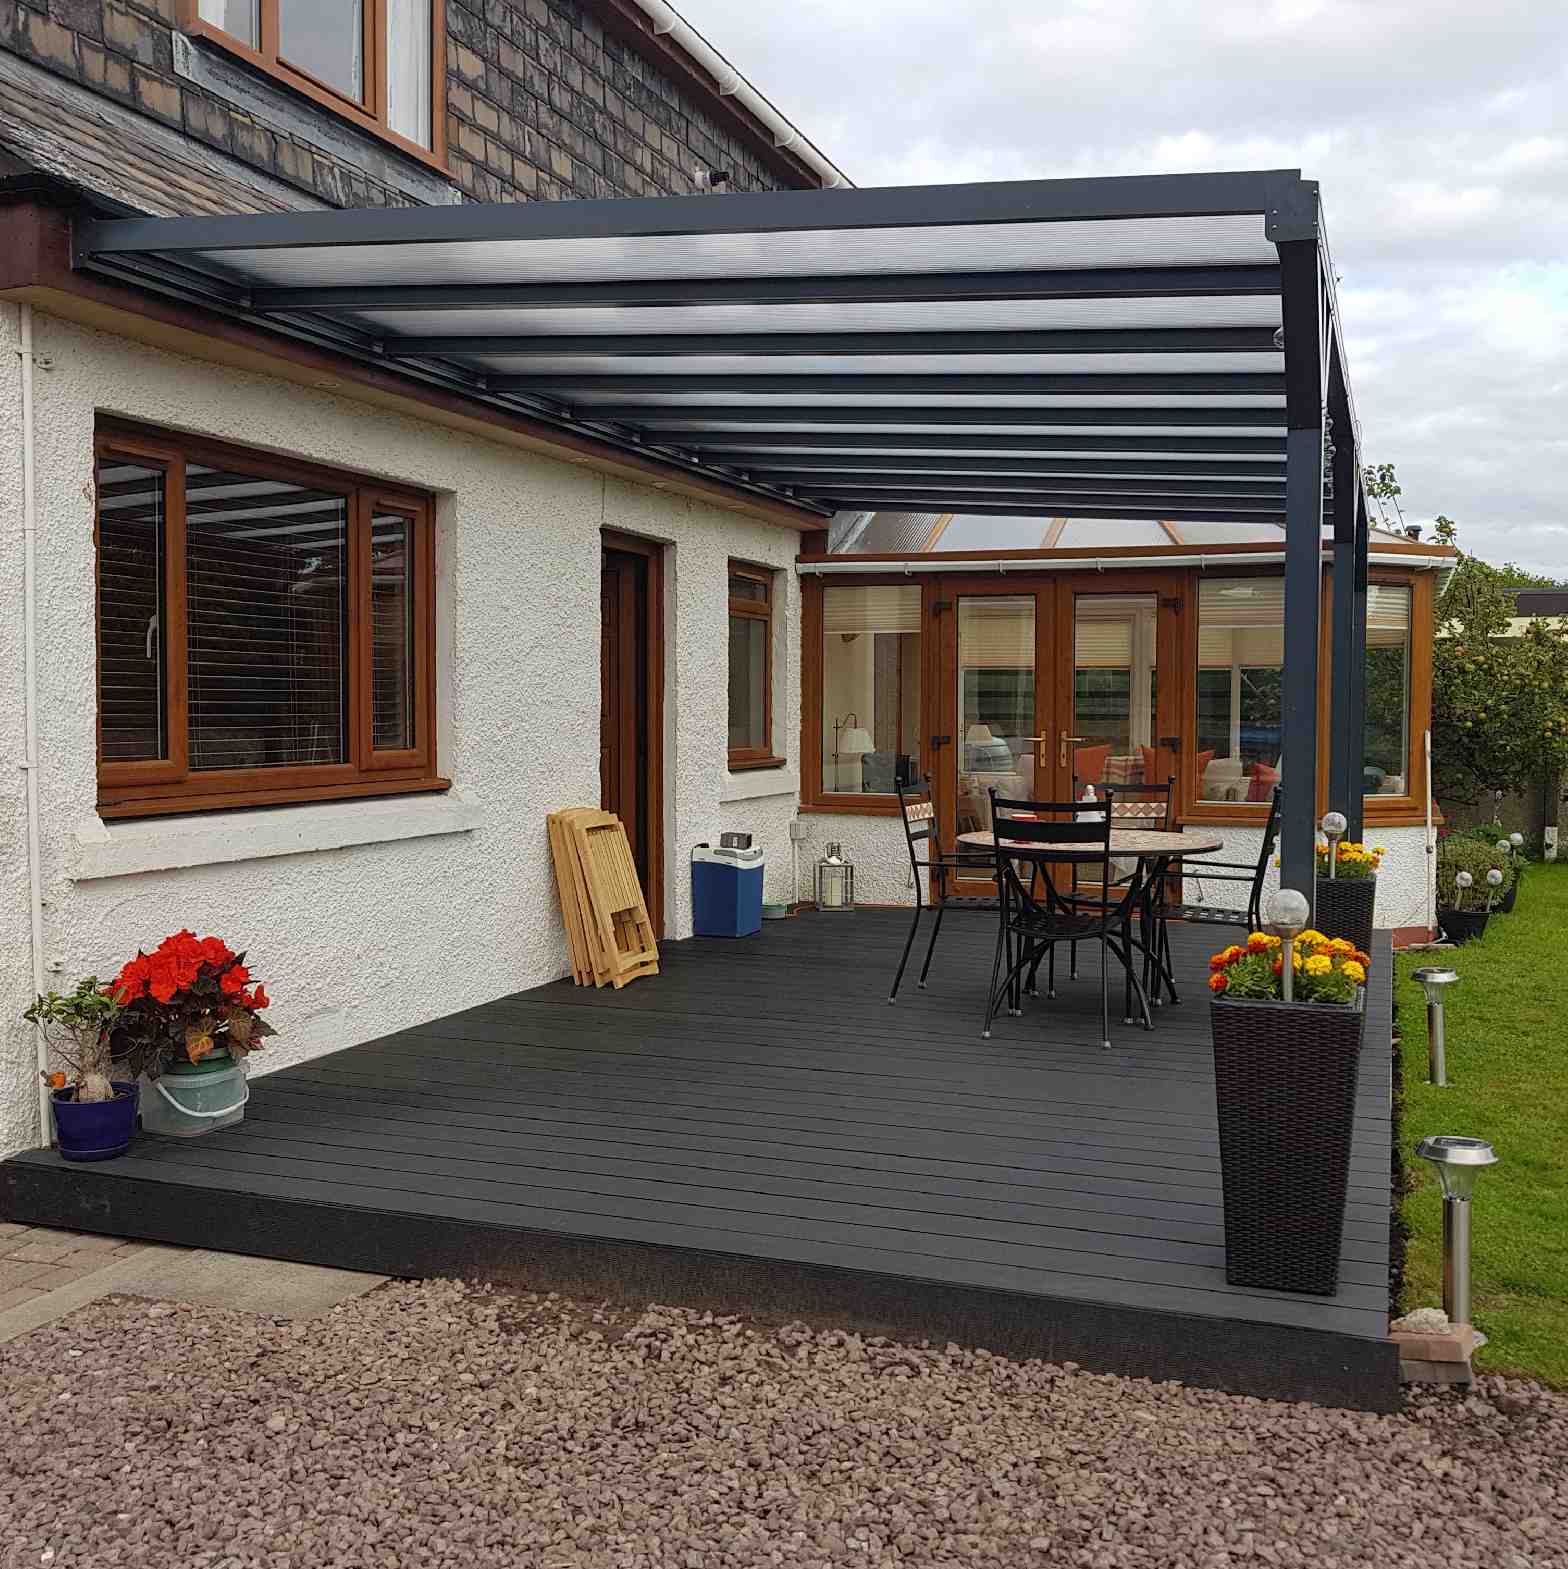 Buy Omega Verandah, Anthracite Grey, 16mm Polycarbonate Glazing - 2.1m (W) x 2.0m (P), (2) Supporting Posts online today